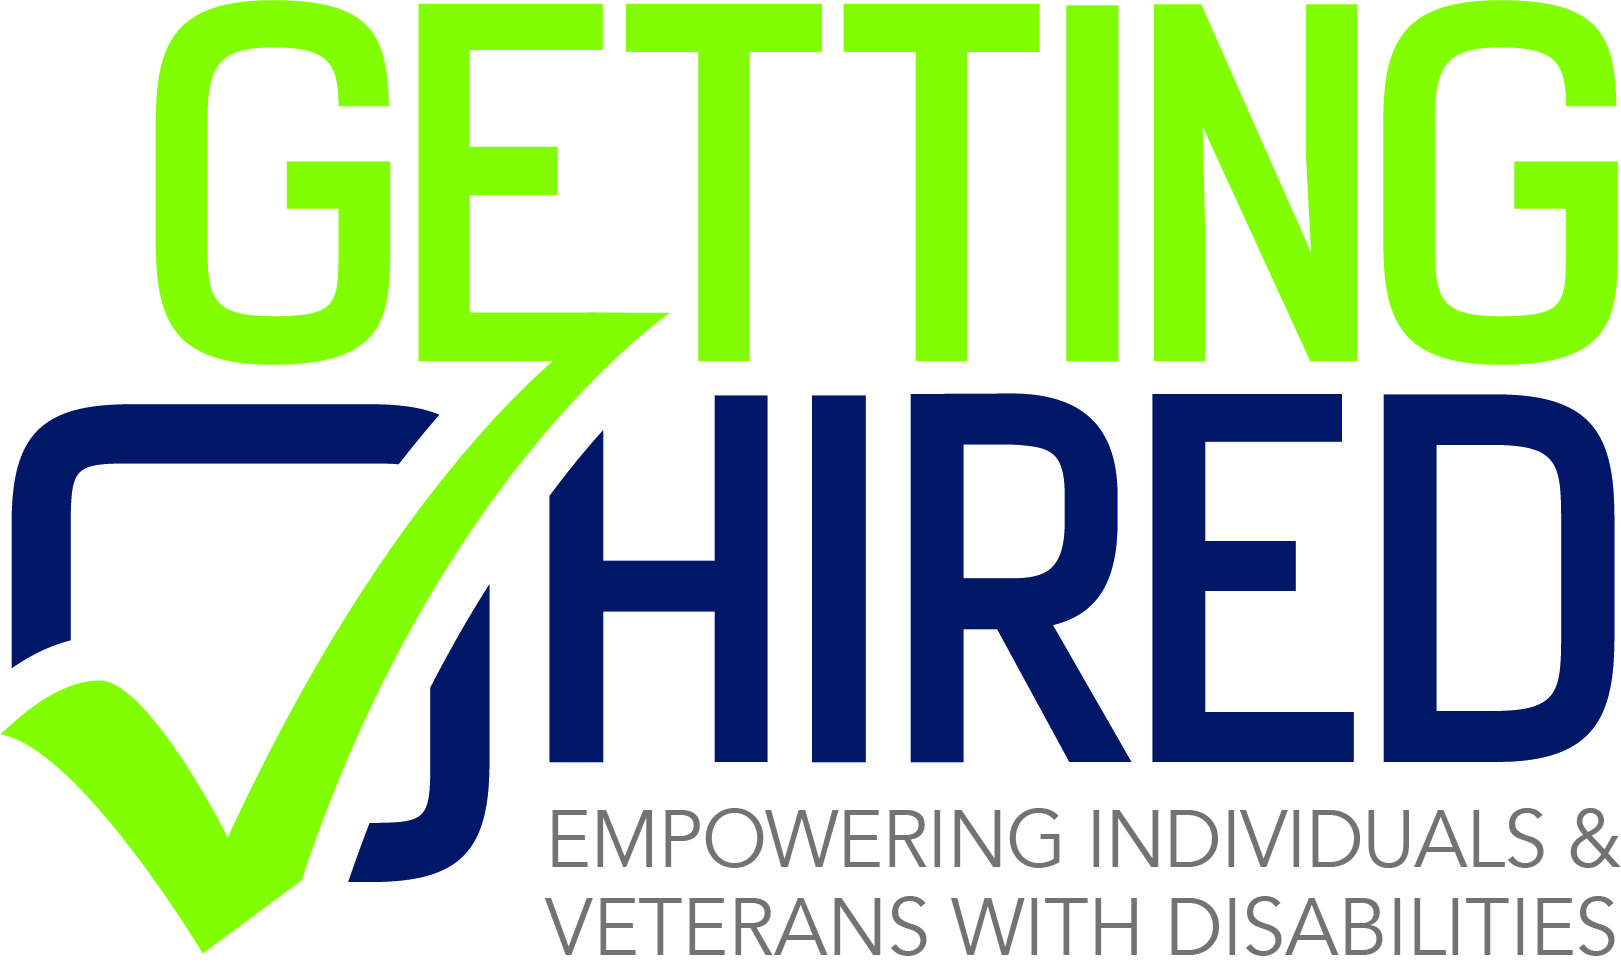 GettingHired.com is a free employment resource for individuals with disabilities